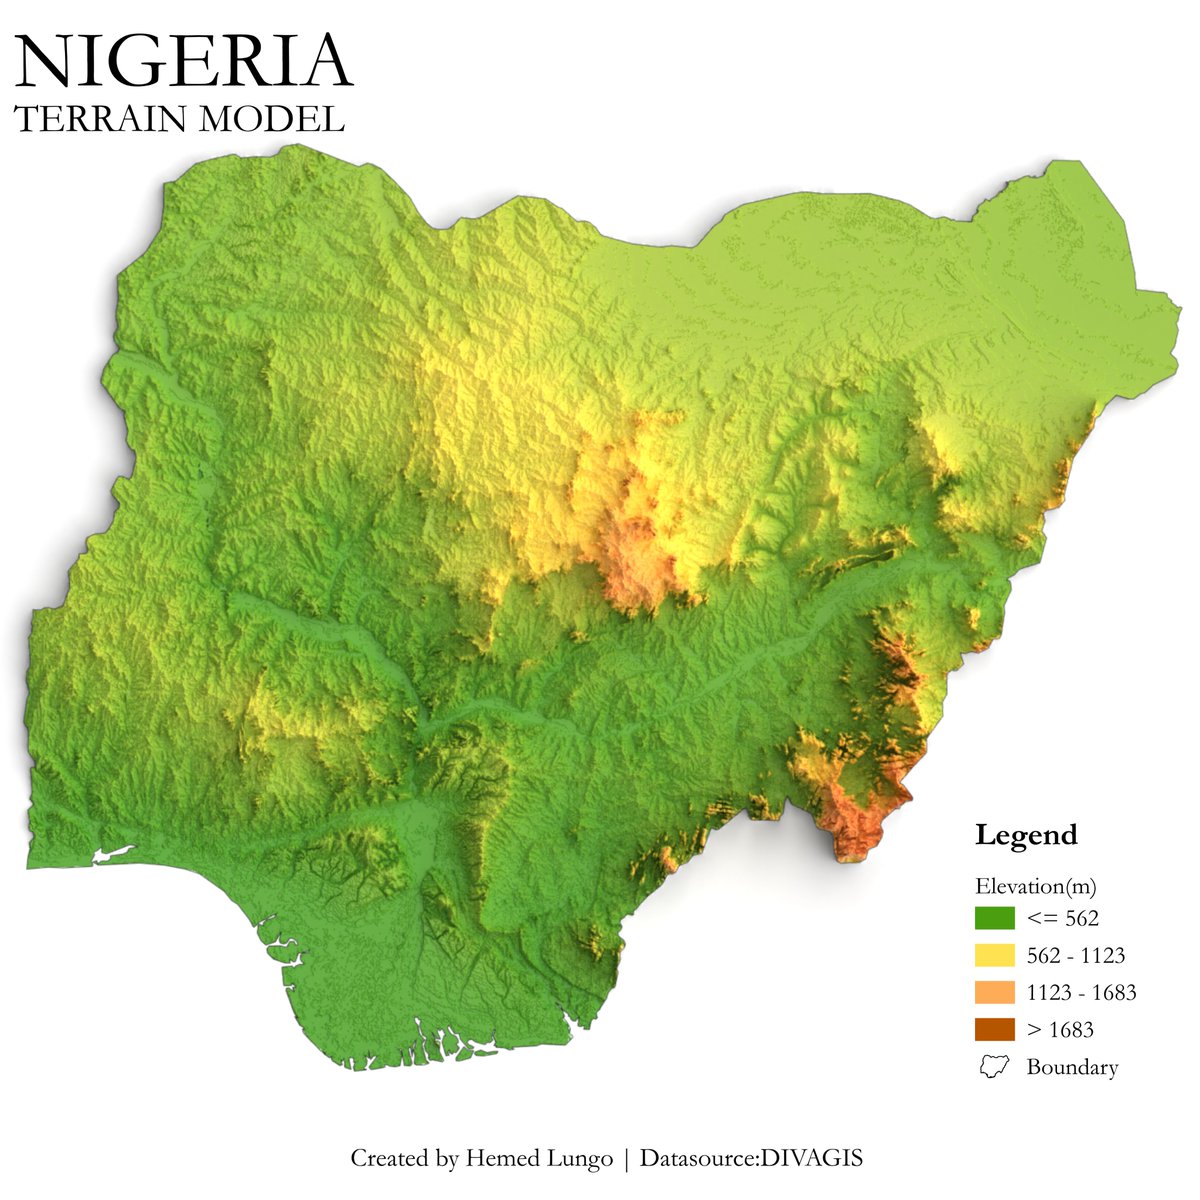 A🗺️ Map showing Terrain Model of Nigeria🇳🇬 done using #Blender and #qgis #Nigeria #gischat #b3d #geosptial